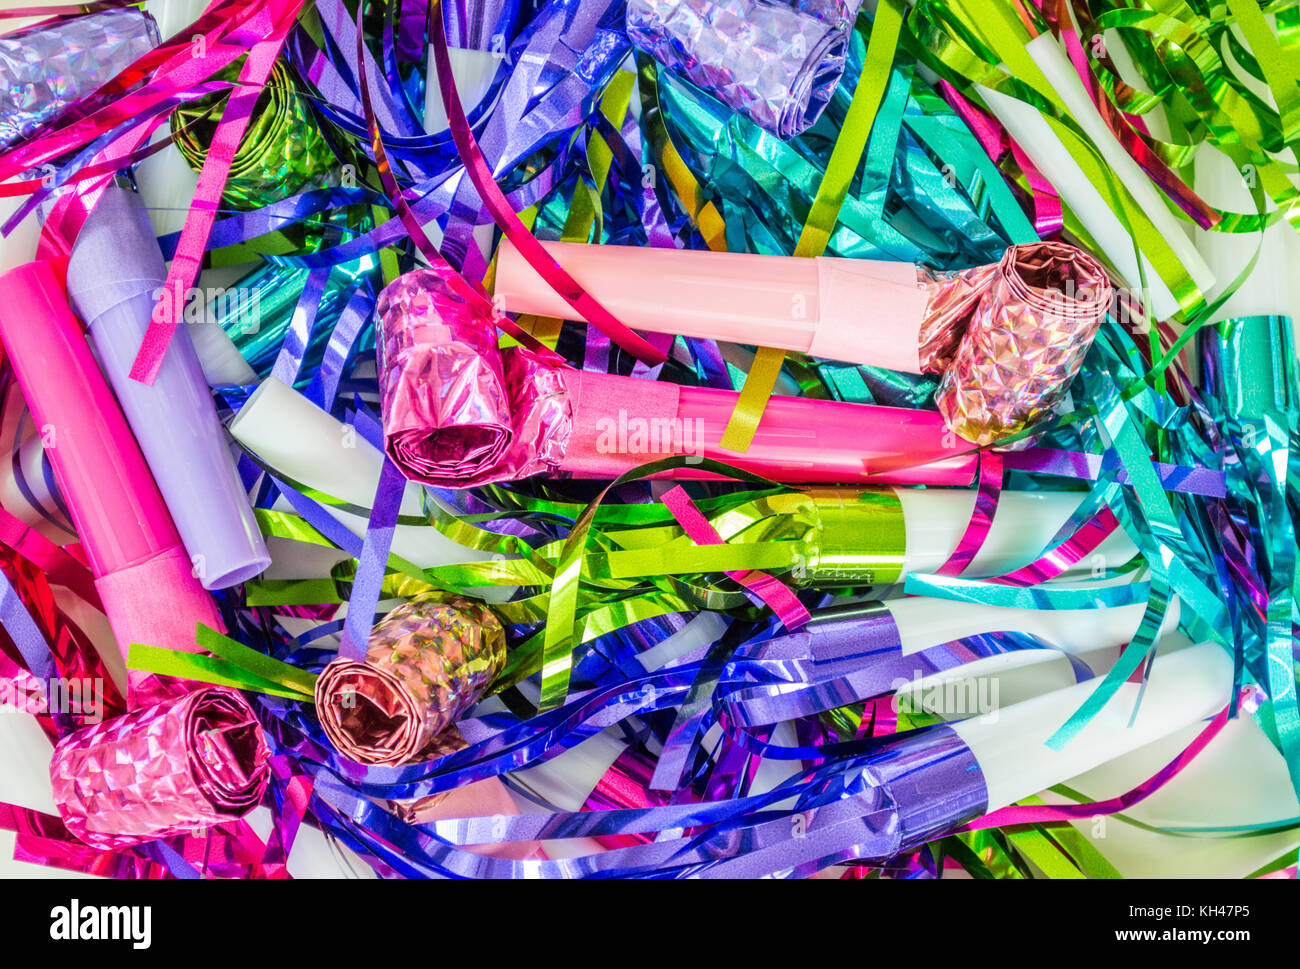 Background Wallpaper Full Frame Of Party Noisemakers And Blowouts Stock Photo Alamy